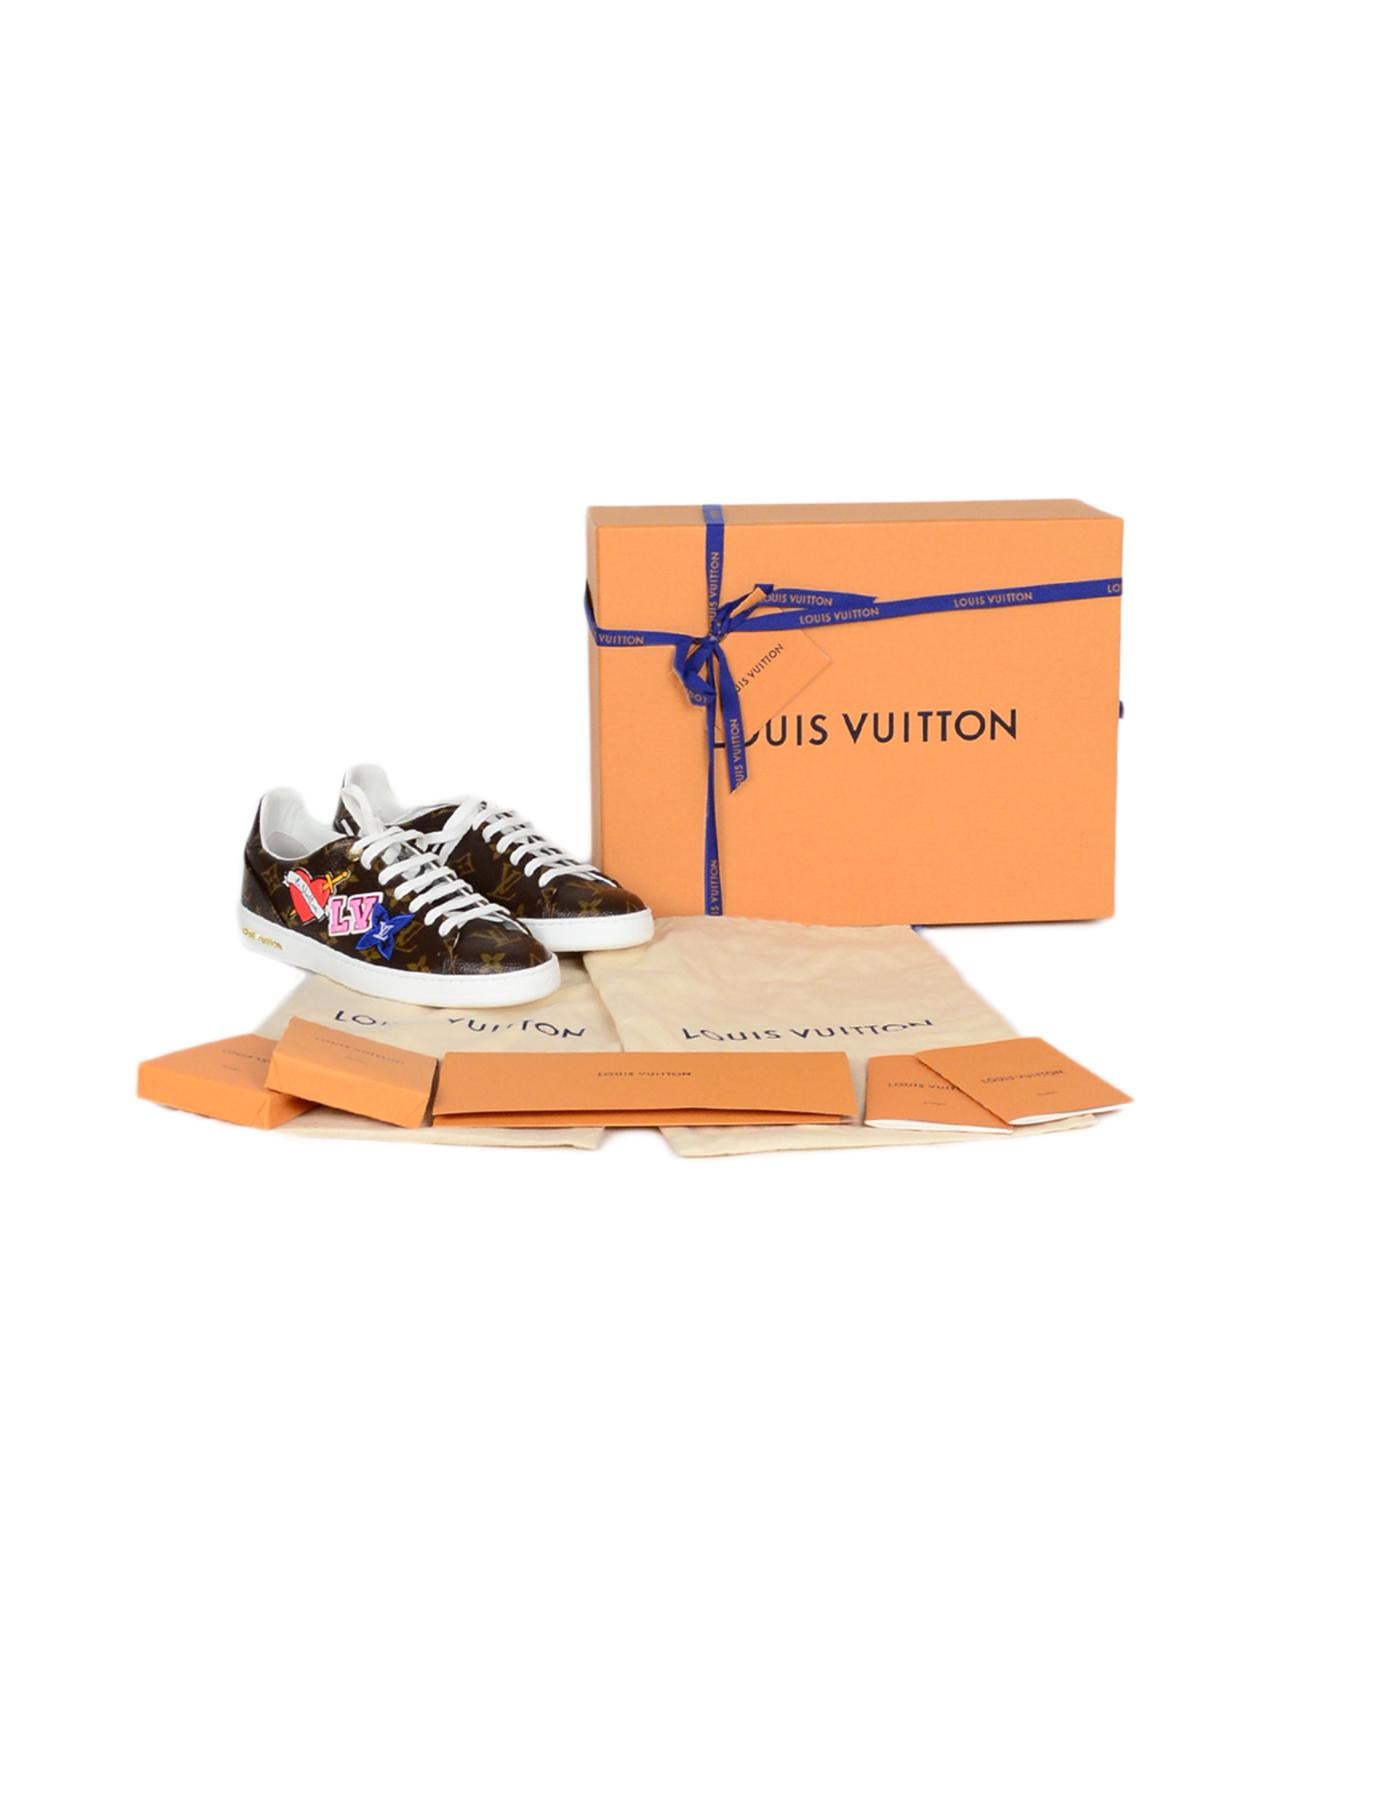 Louis Vuitton New 2018 Monogram Frontrow Patchwork Sneakers sz 37.5

Made In: France
Year of Production: 2018
Color: Brown
Hardware: Goldtone hardware
Materials: Coated canvas
Closure/Opening: Lace-up
Overall Condition: New
Estimated Retail: $645 +